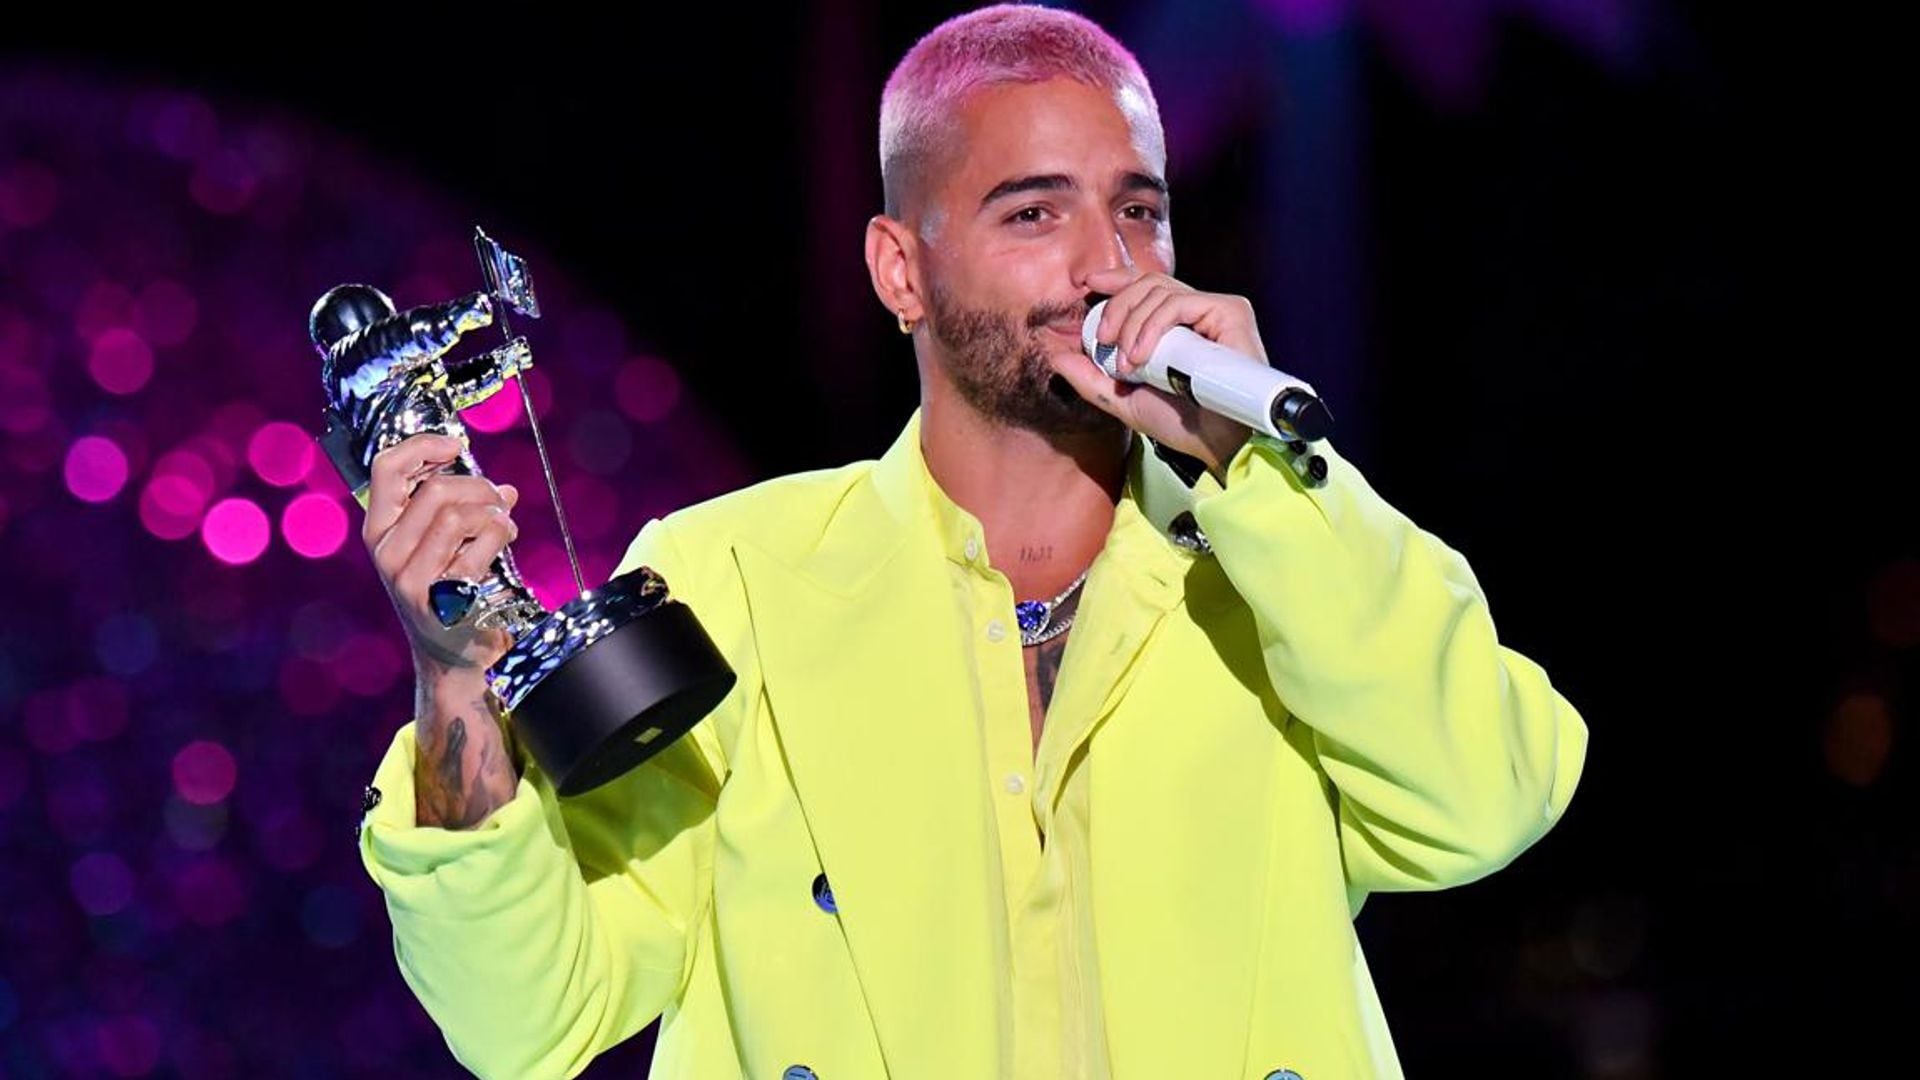 Maluma’s Hit “Hawái” Nabs The Number One Spot On Hot Latin Songs Chart